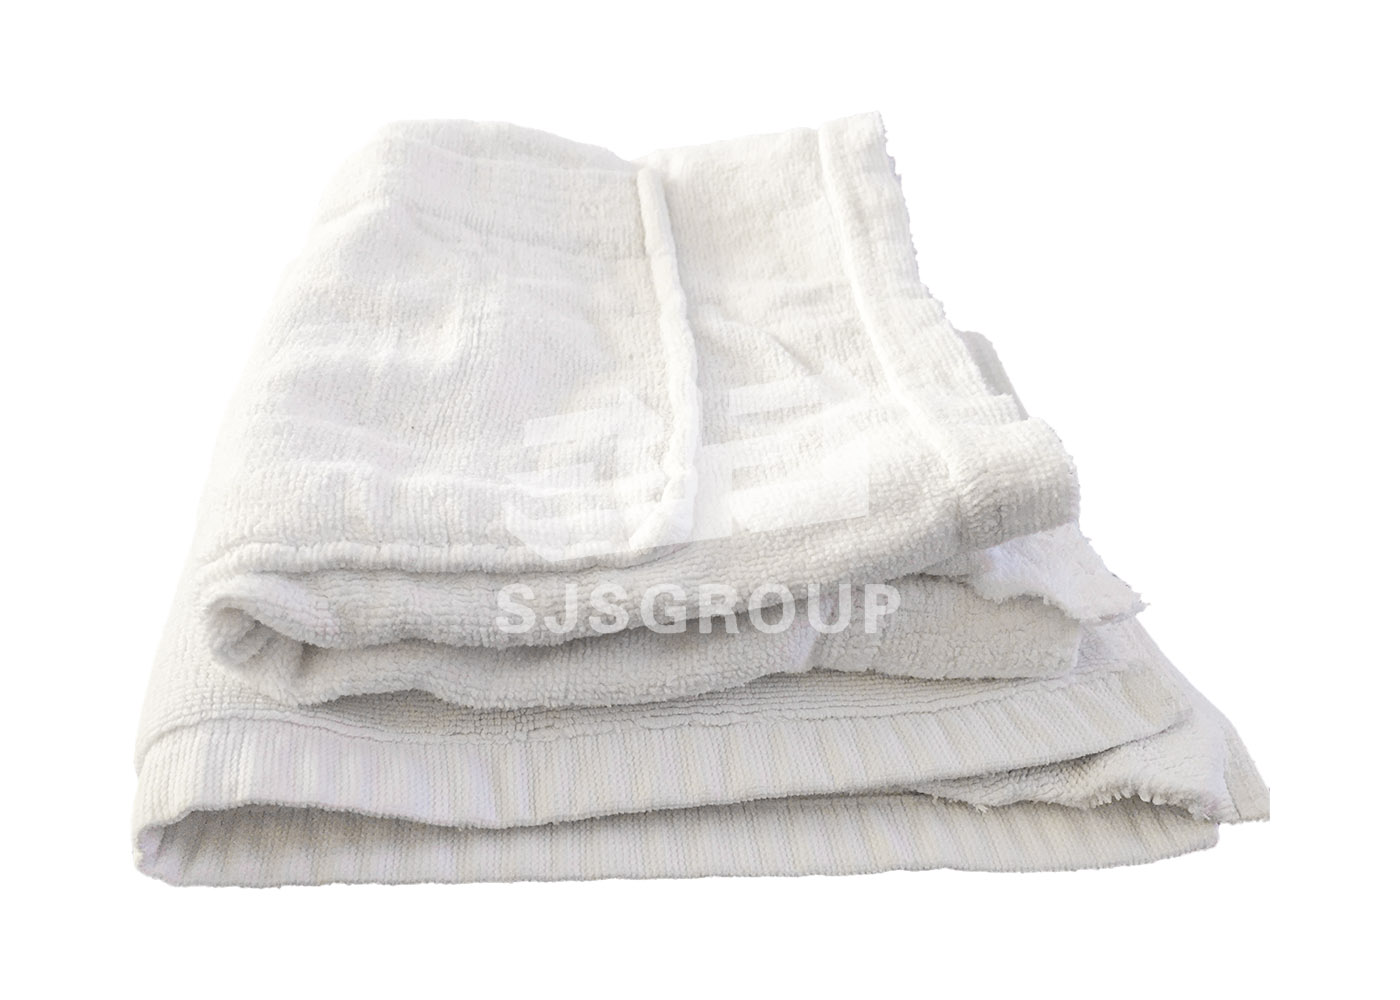 White Towel Rags-Mixed Bathrobe And File Towel Rags Grade C